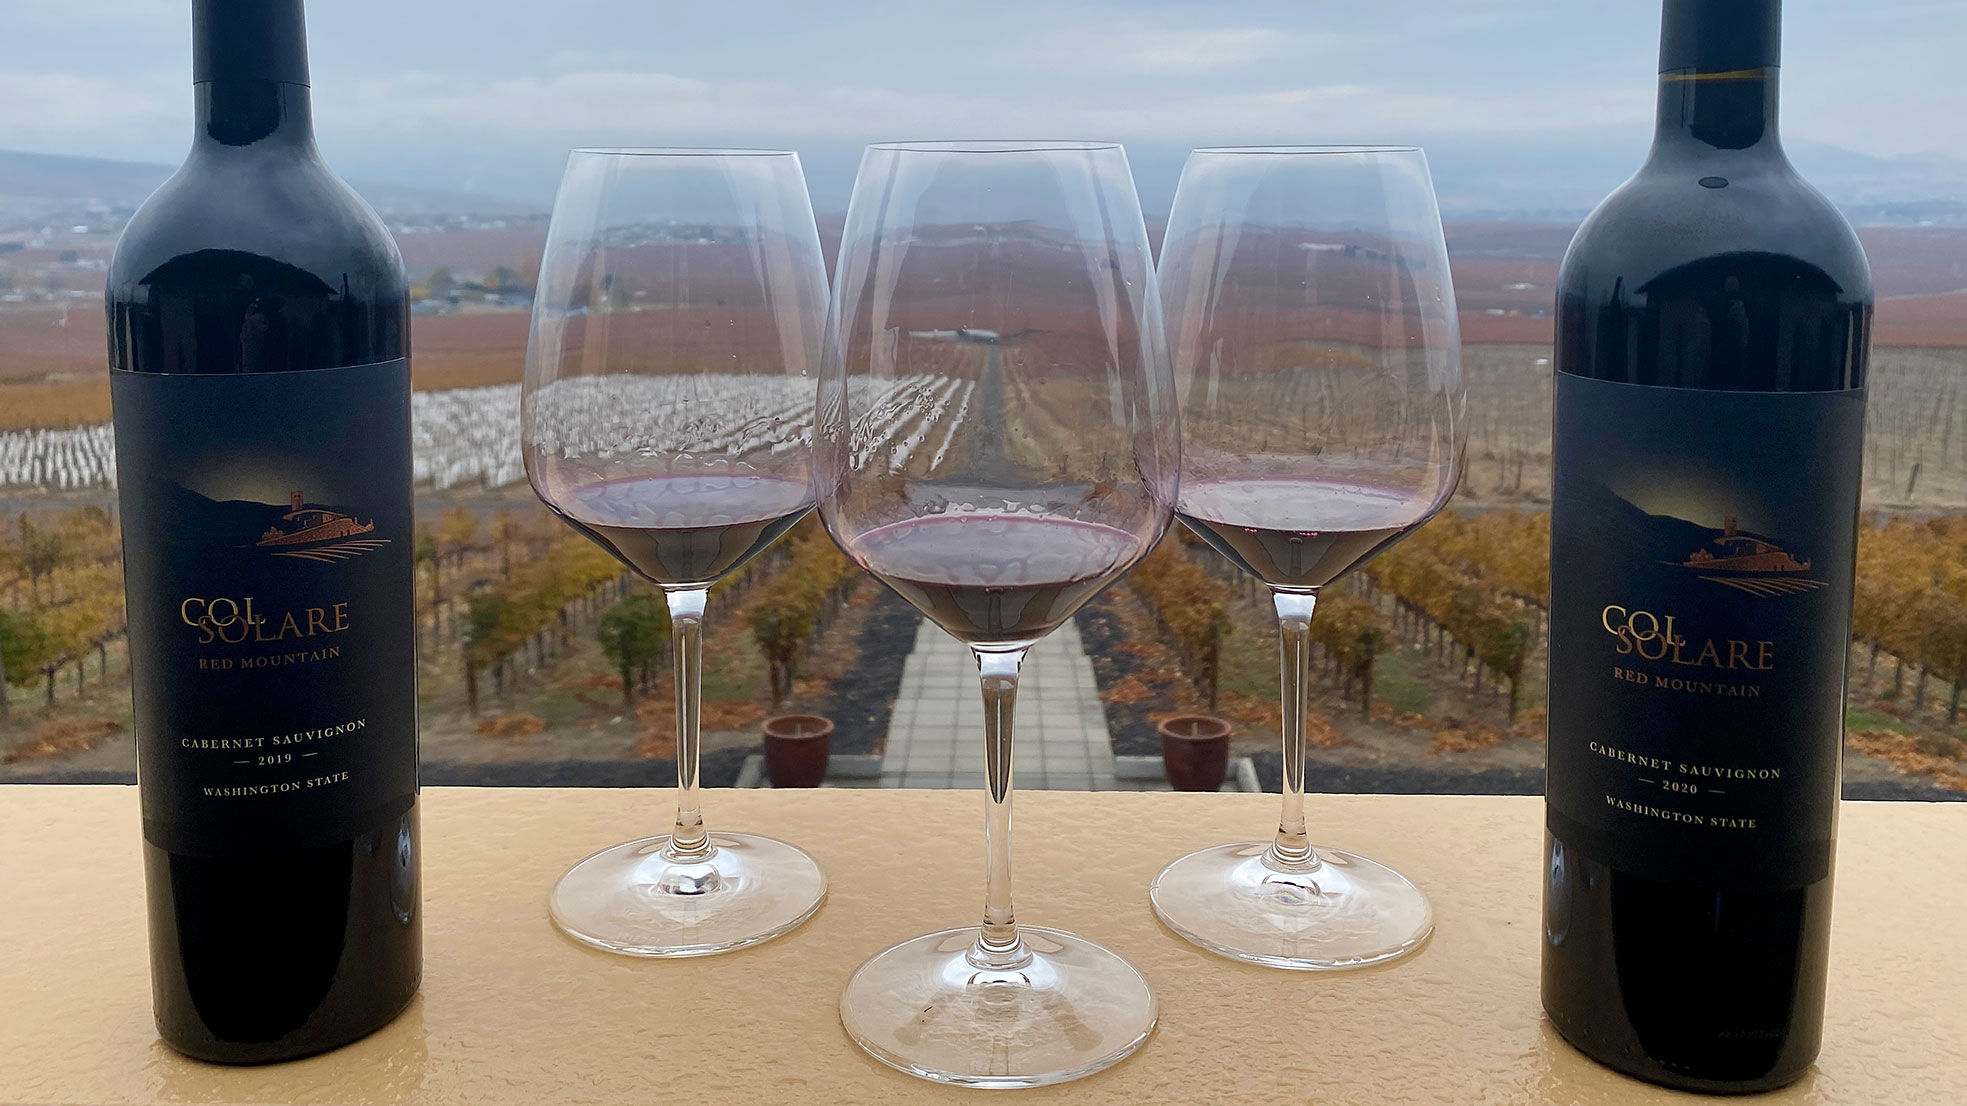 Glasses of wine with bottles of Col Solare